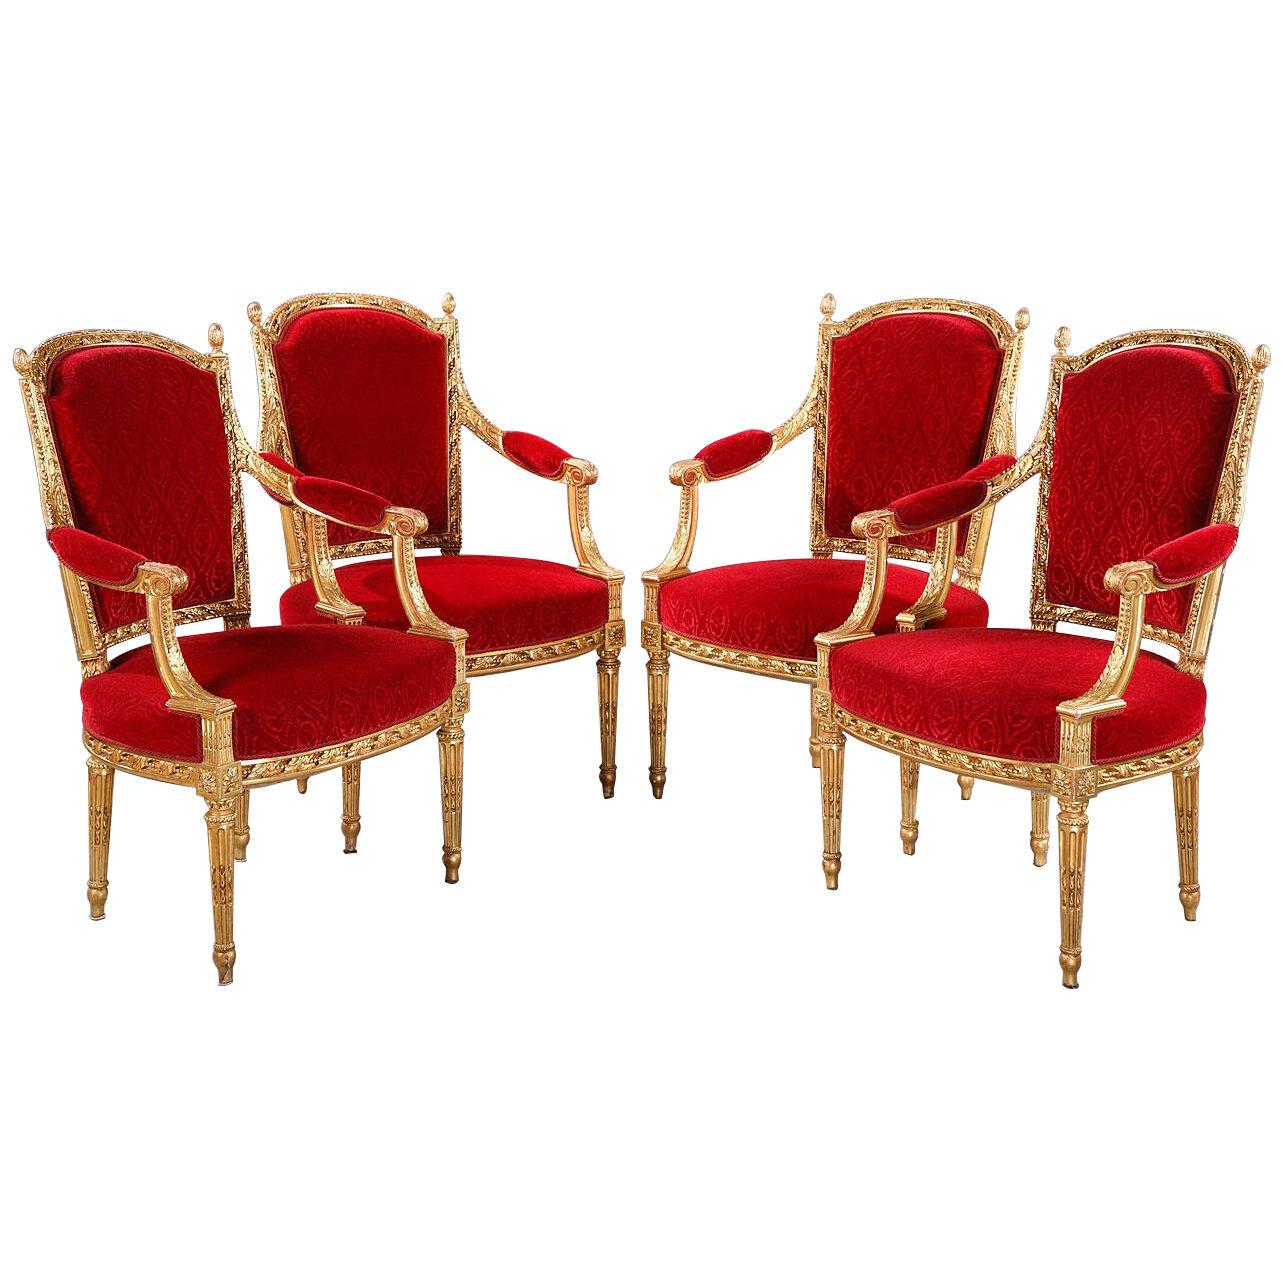 Set of Four Louis XVI Style Armchairs by A. Levraux, France, 19th Century